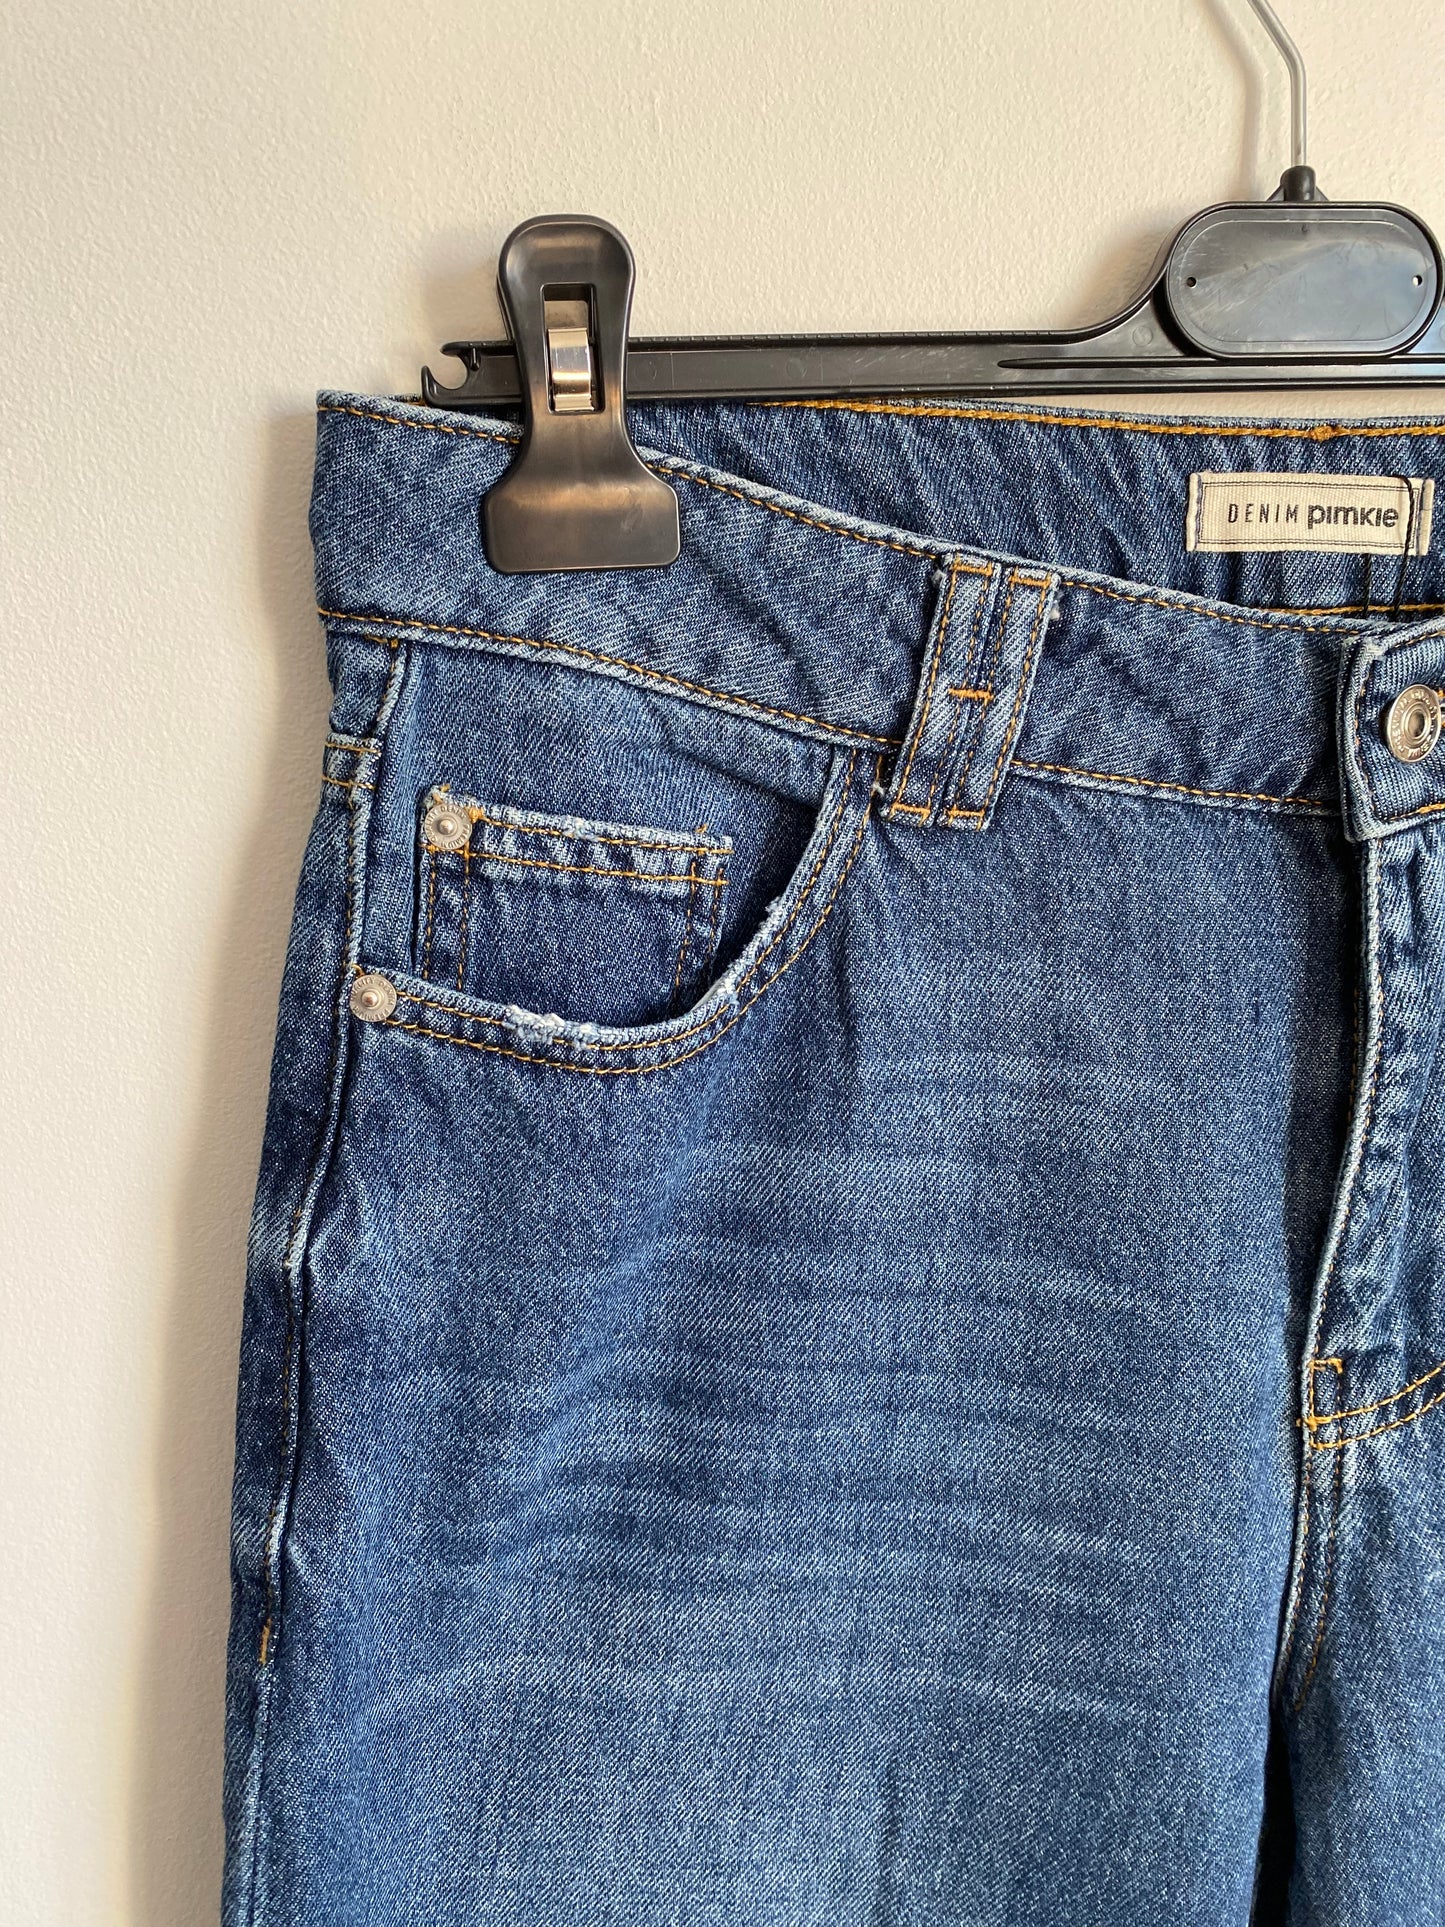 Jeans Pimkie droit/mom Taille 38/40